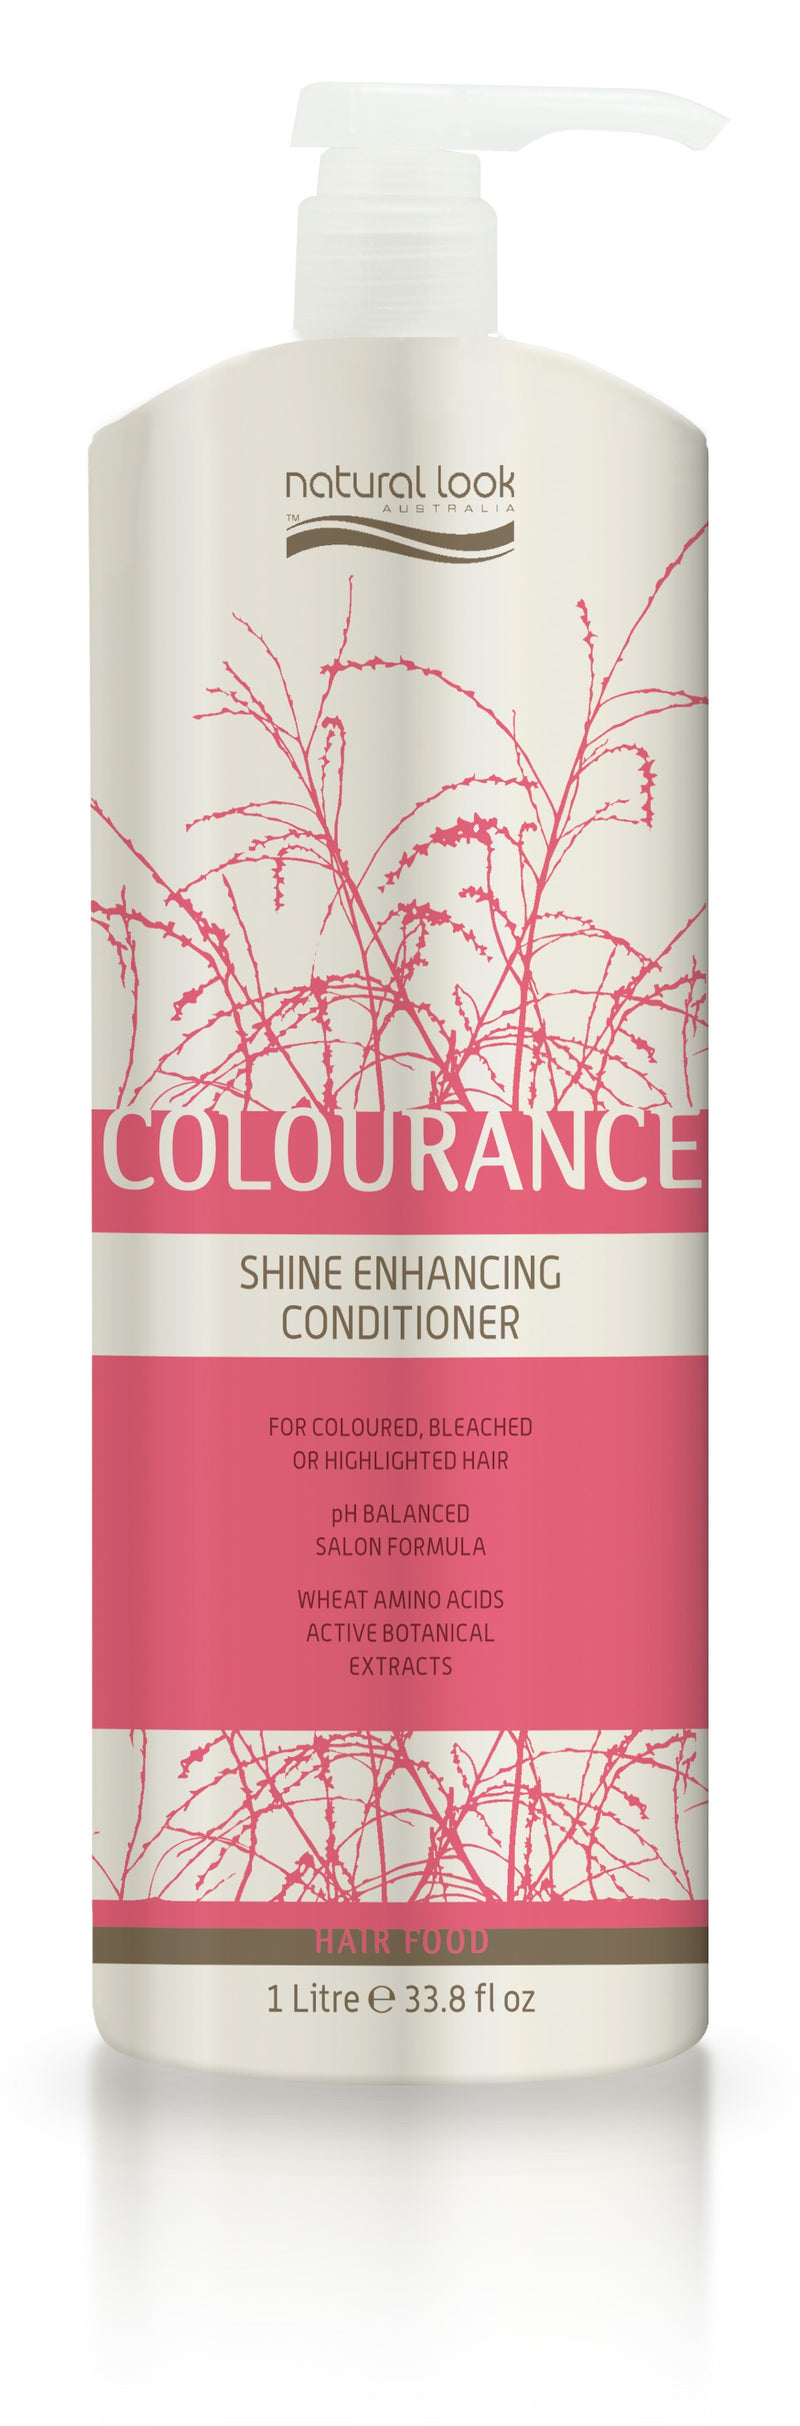 Natural Look Colourance Shine Enhancing Conditioner 1L